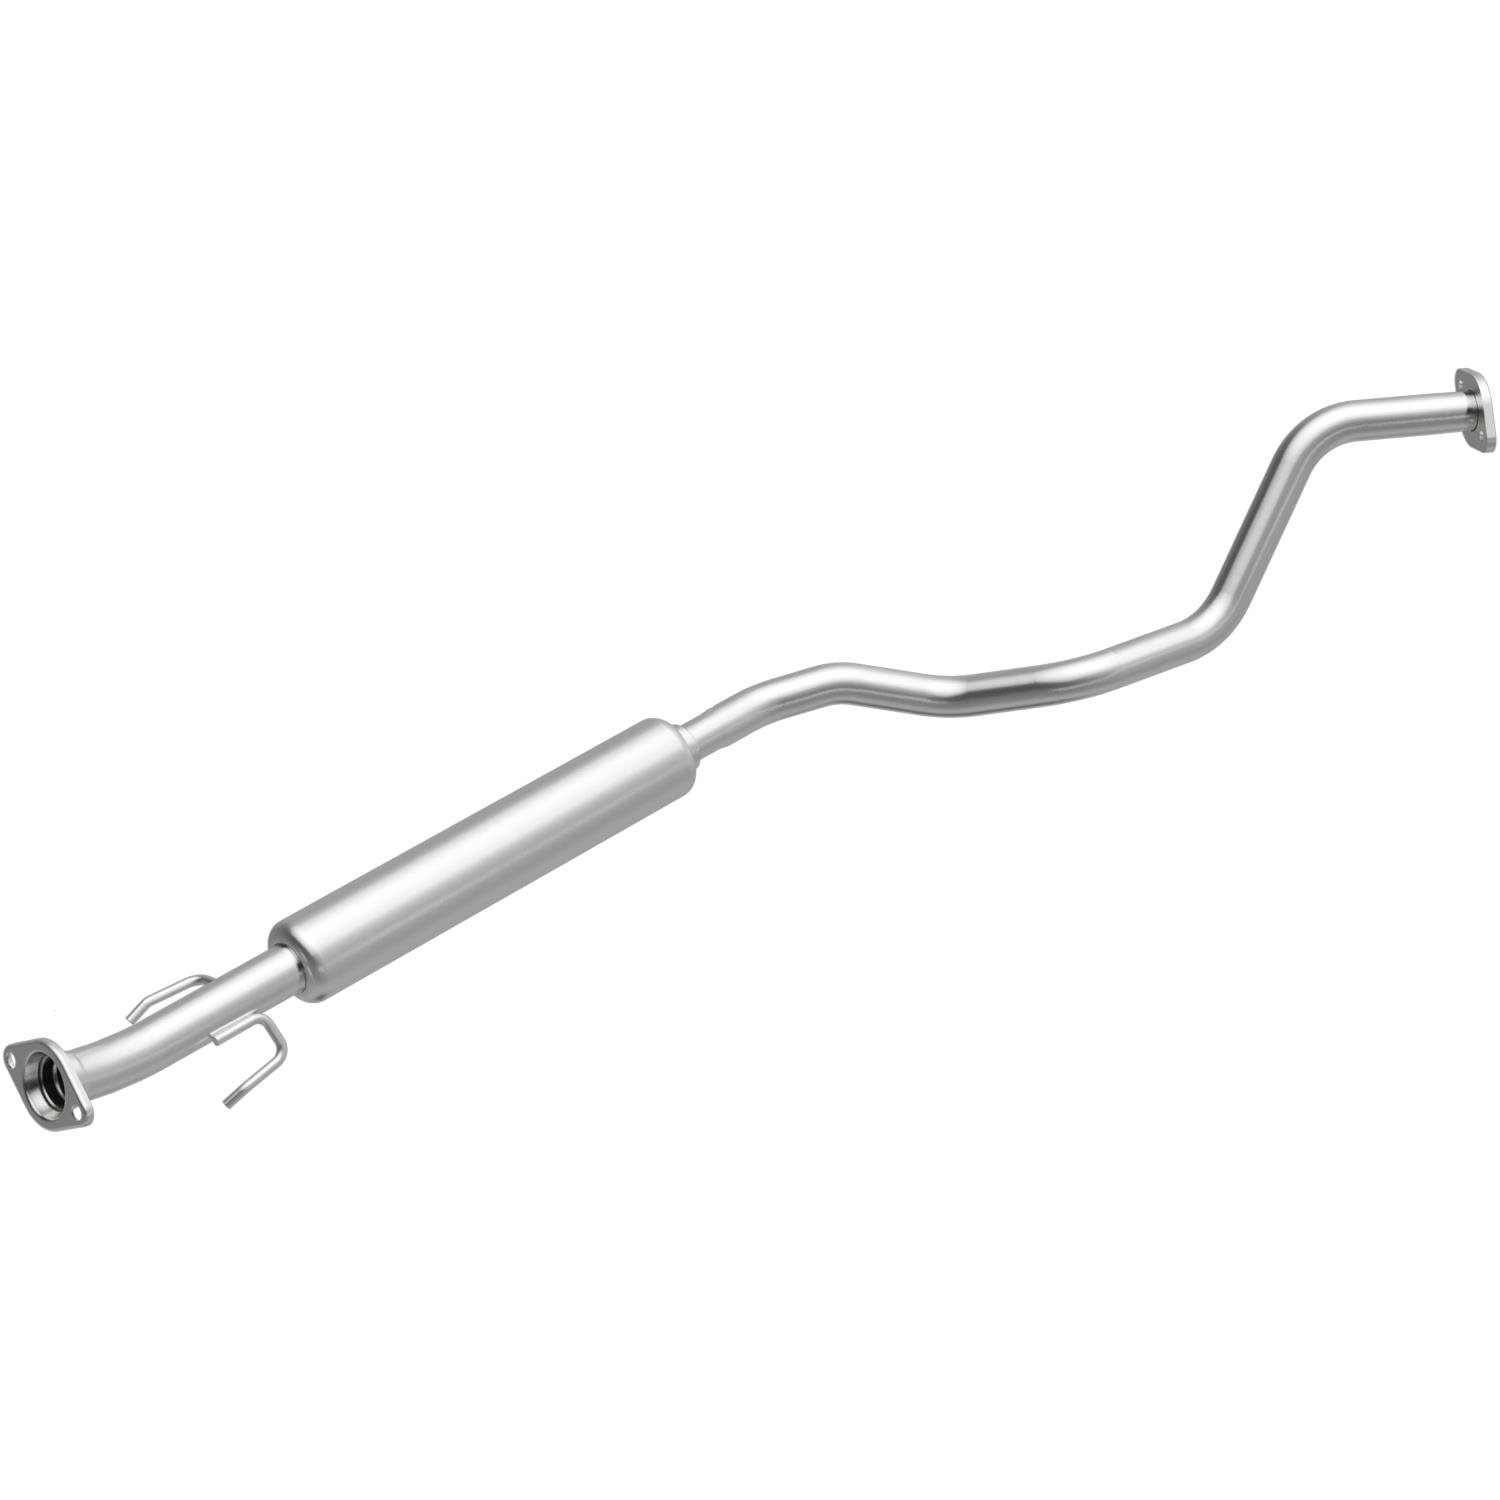 Direct-Fit Exhaust Resonator and Pipe Assembly, 2009-2014 Nissan Cube 1.8L